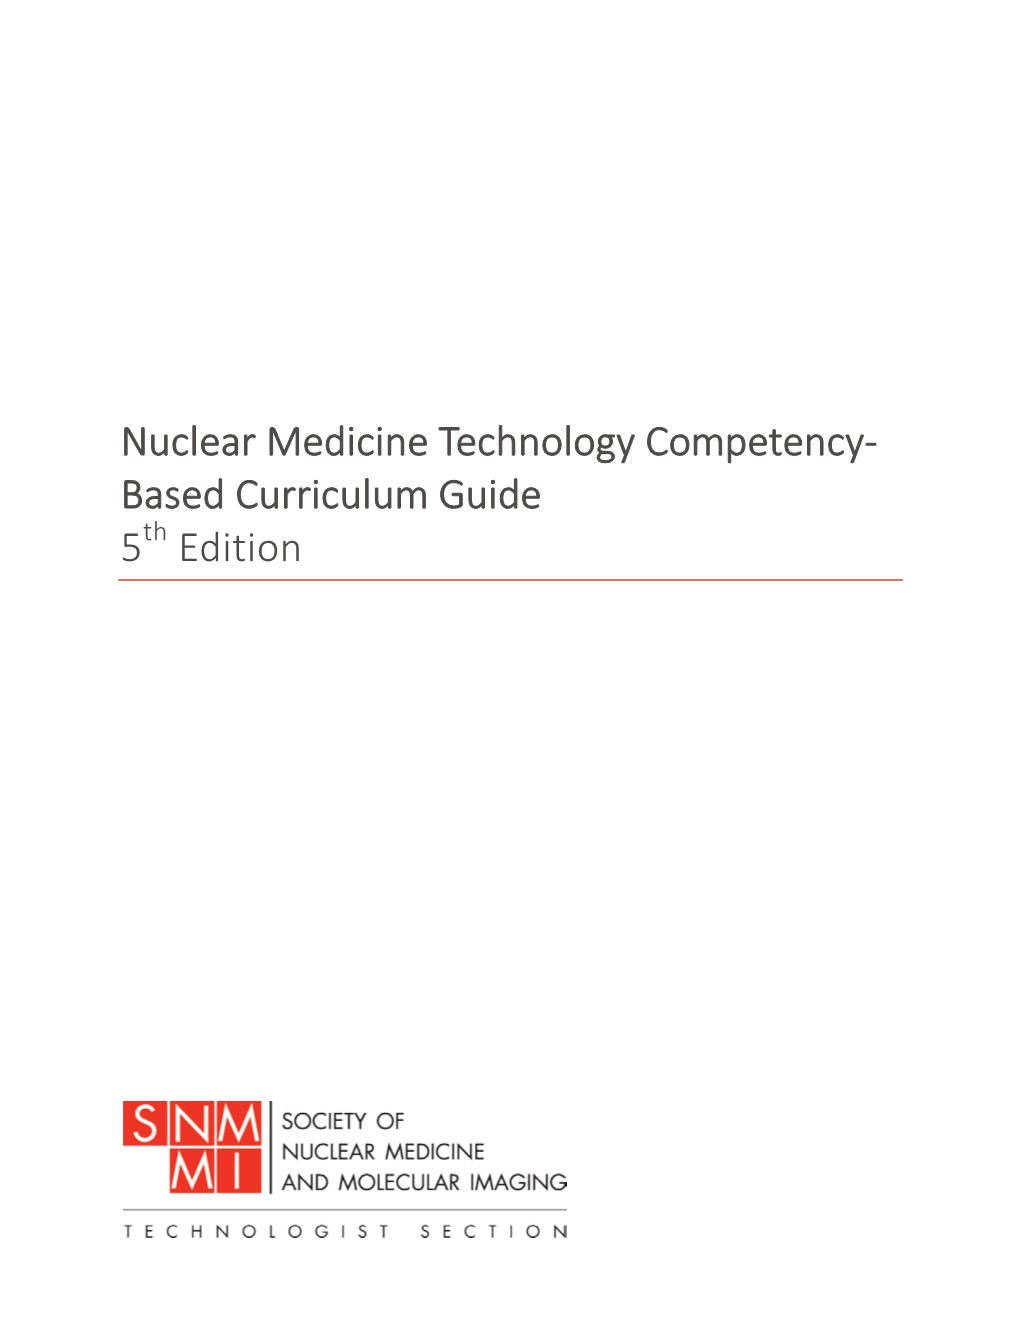 SNMMI Nuclear Medicine Technology Competency Based Curriculum